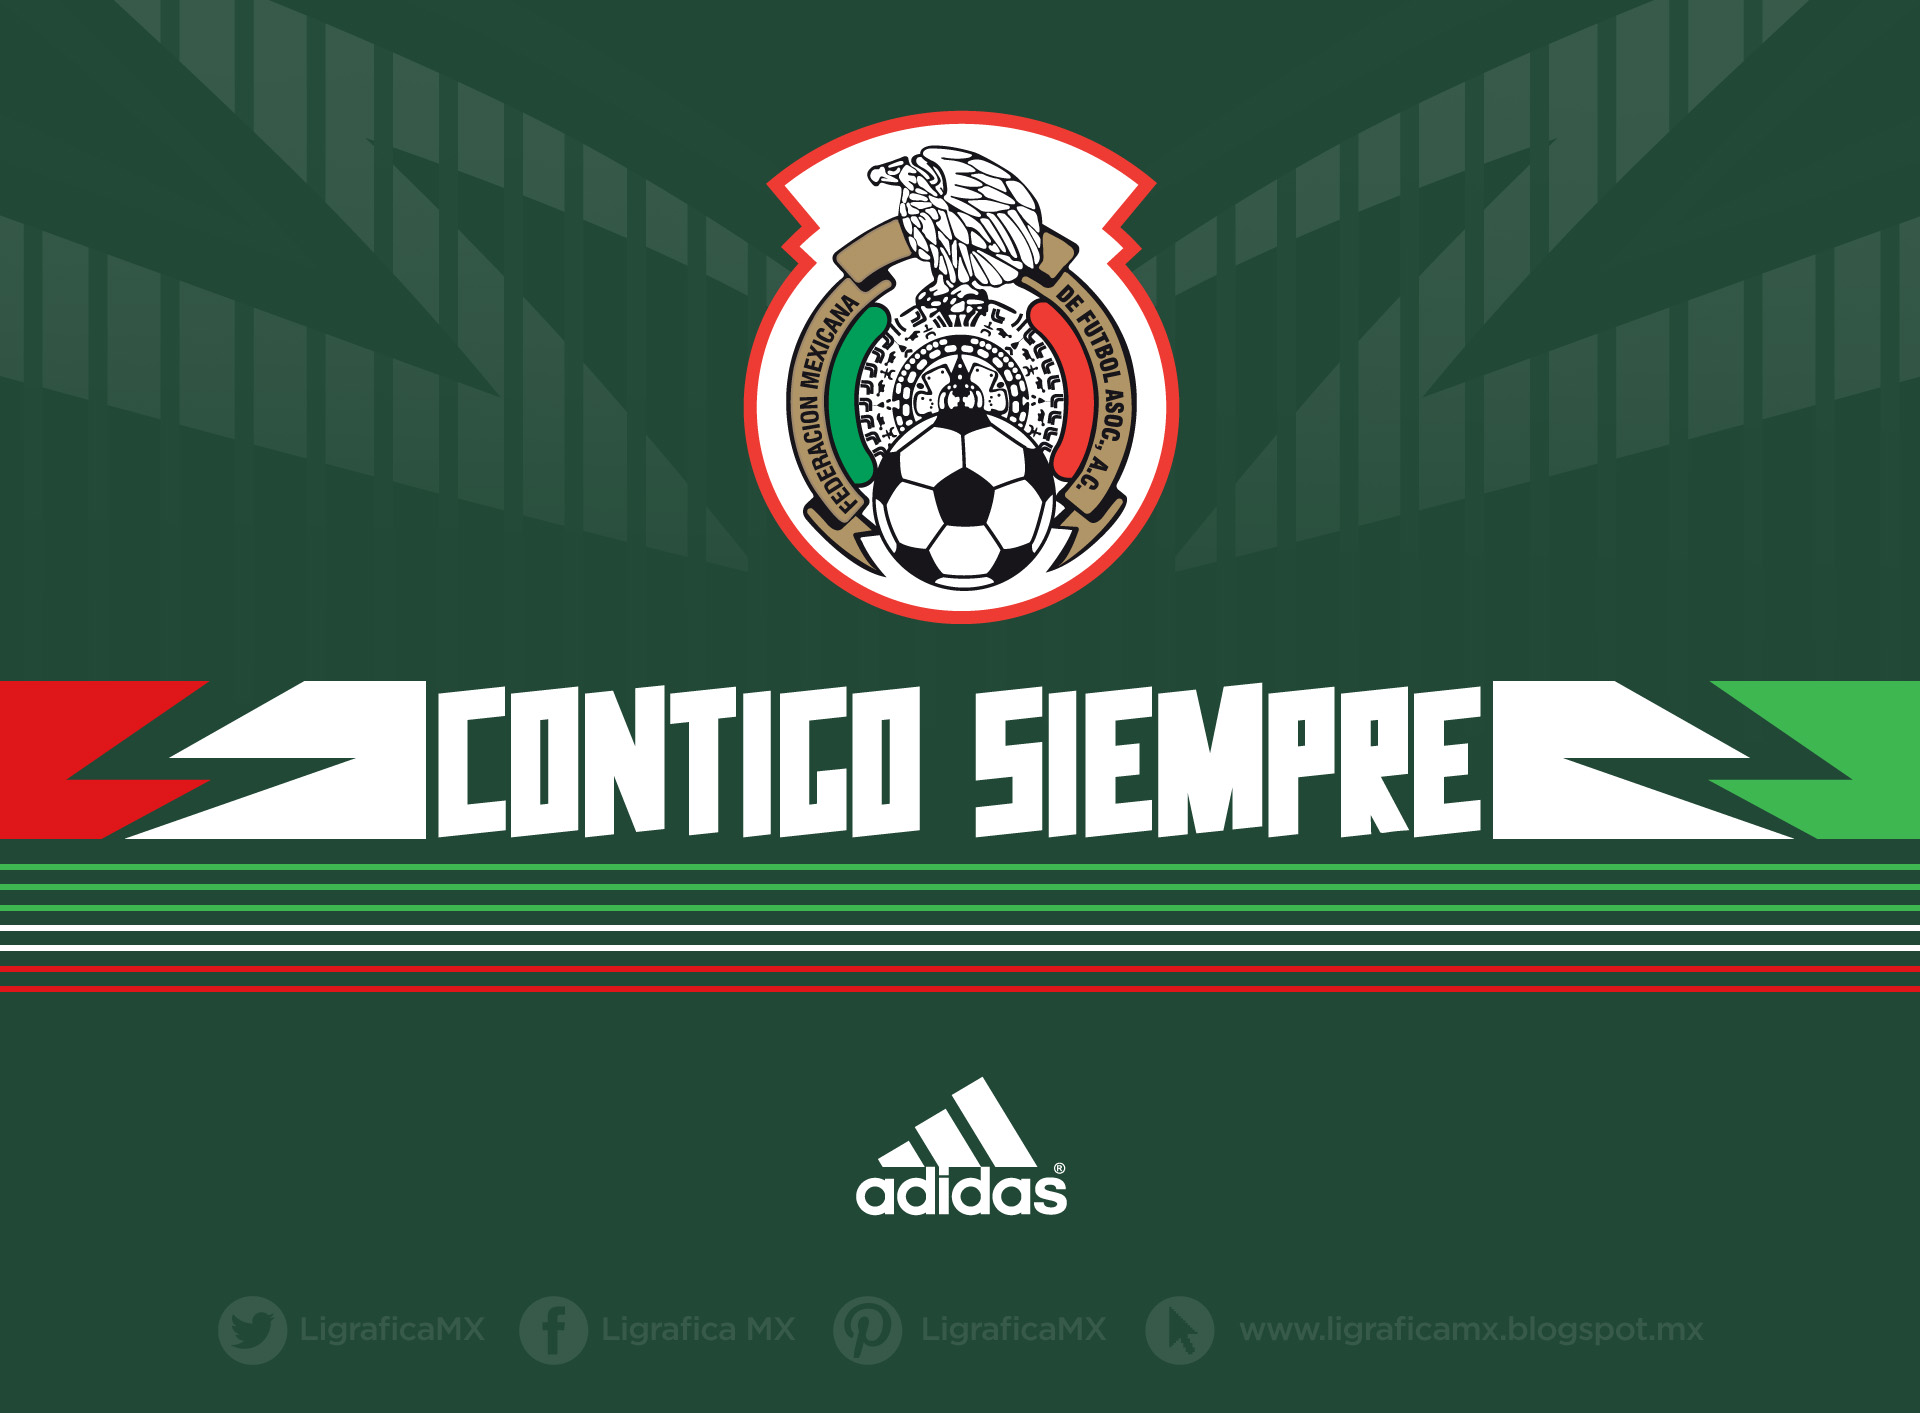 products, adidas, mexico